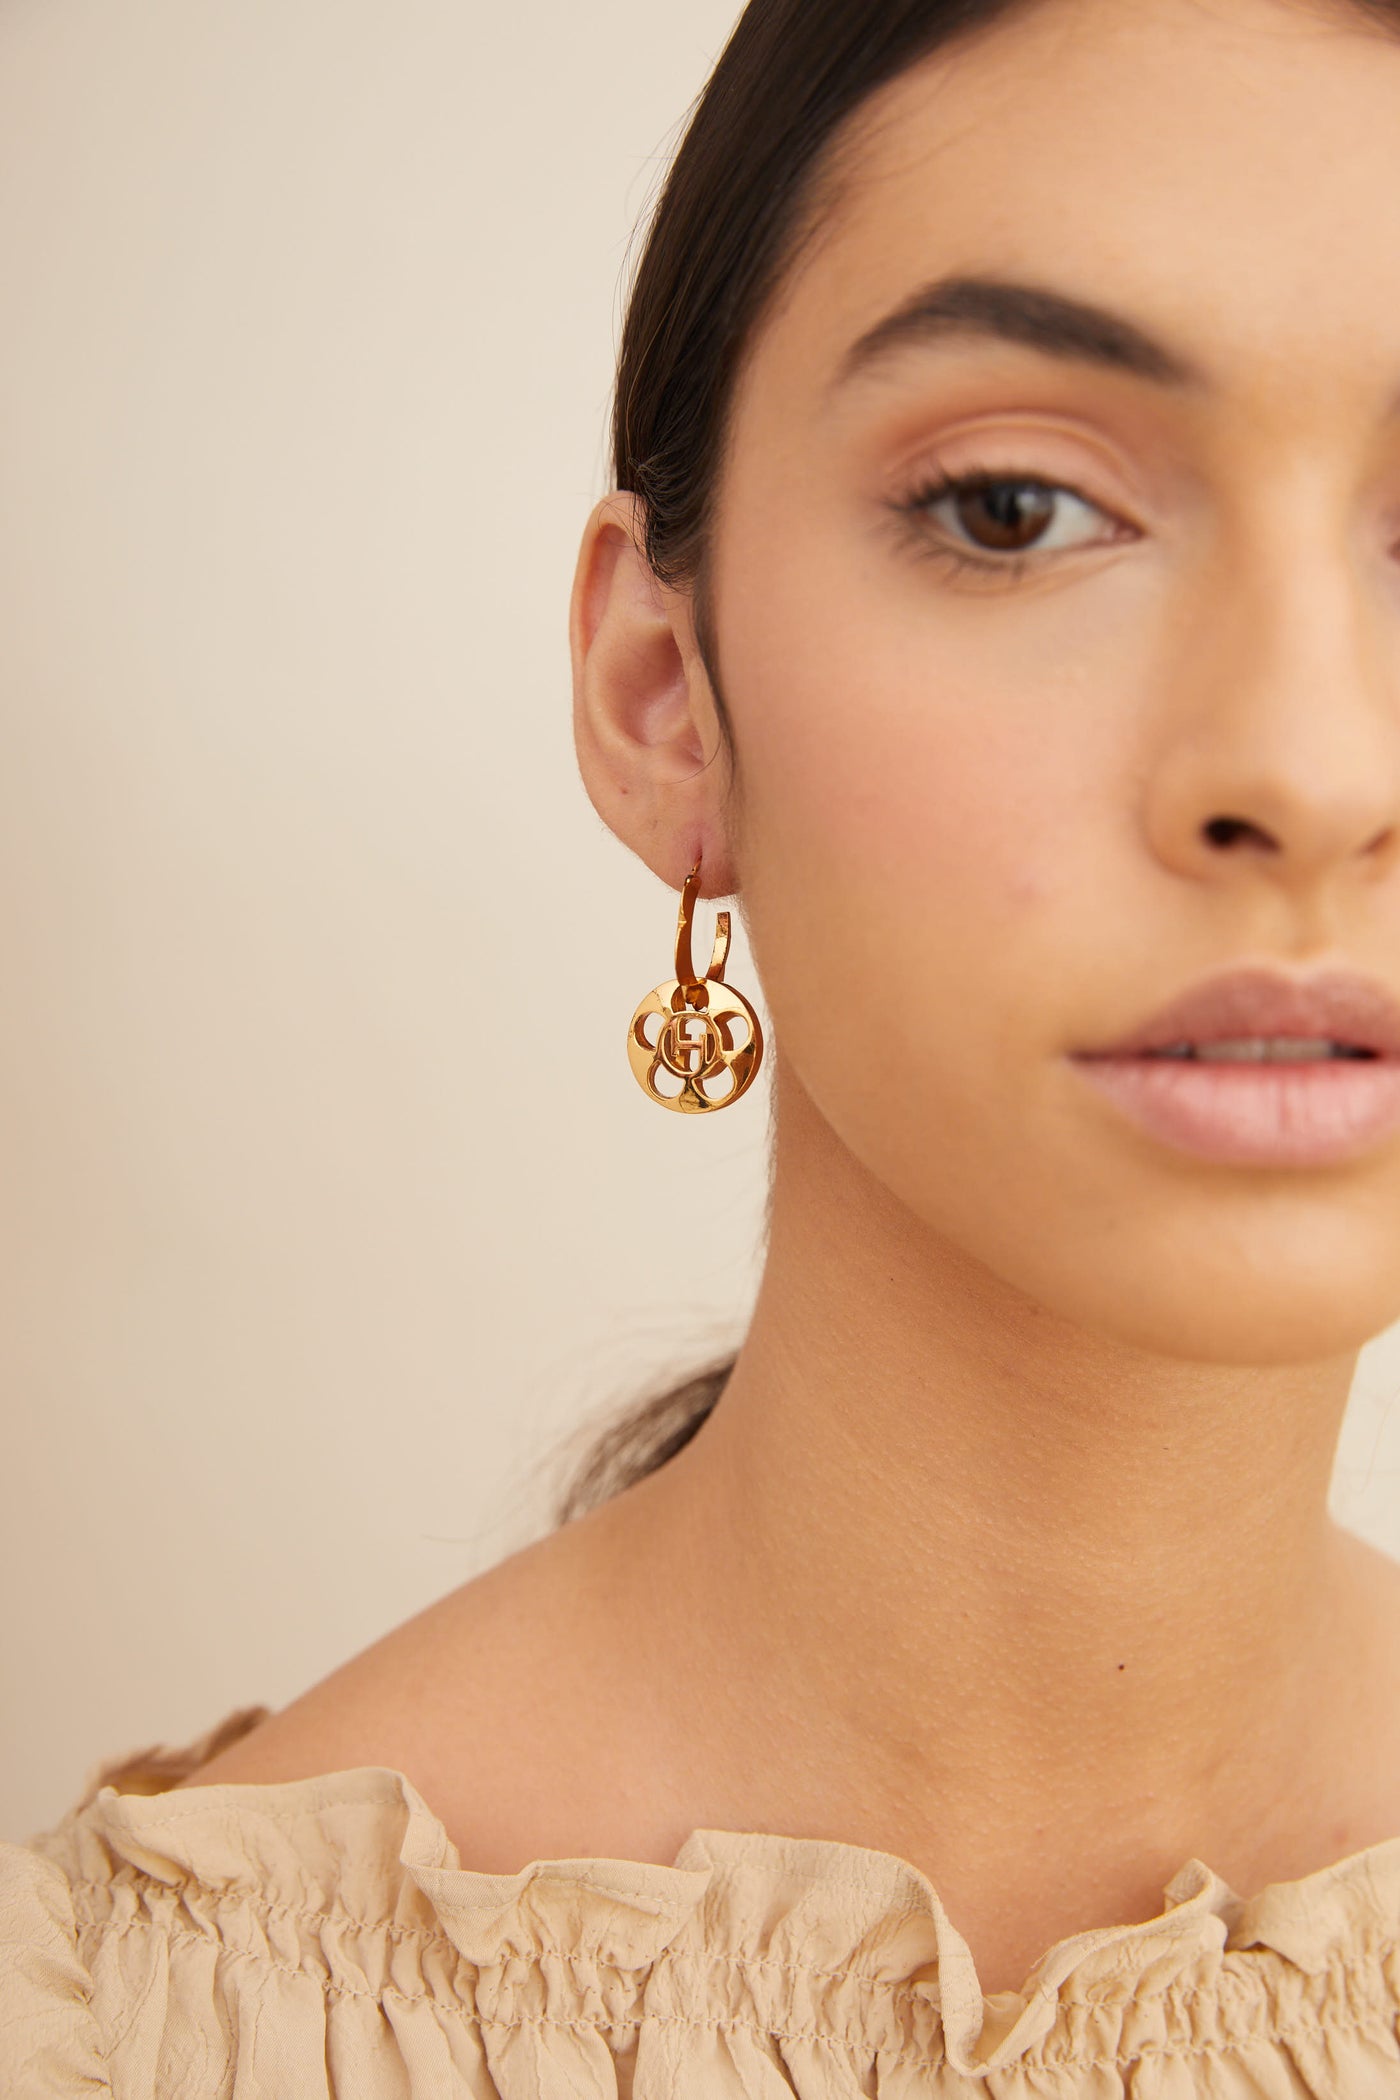 Outhouse jewellery OH Petite Drop Earrings online shopping melange singapore indian designer wear